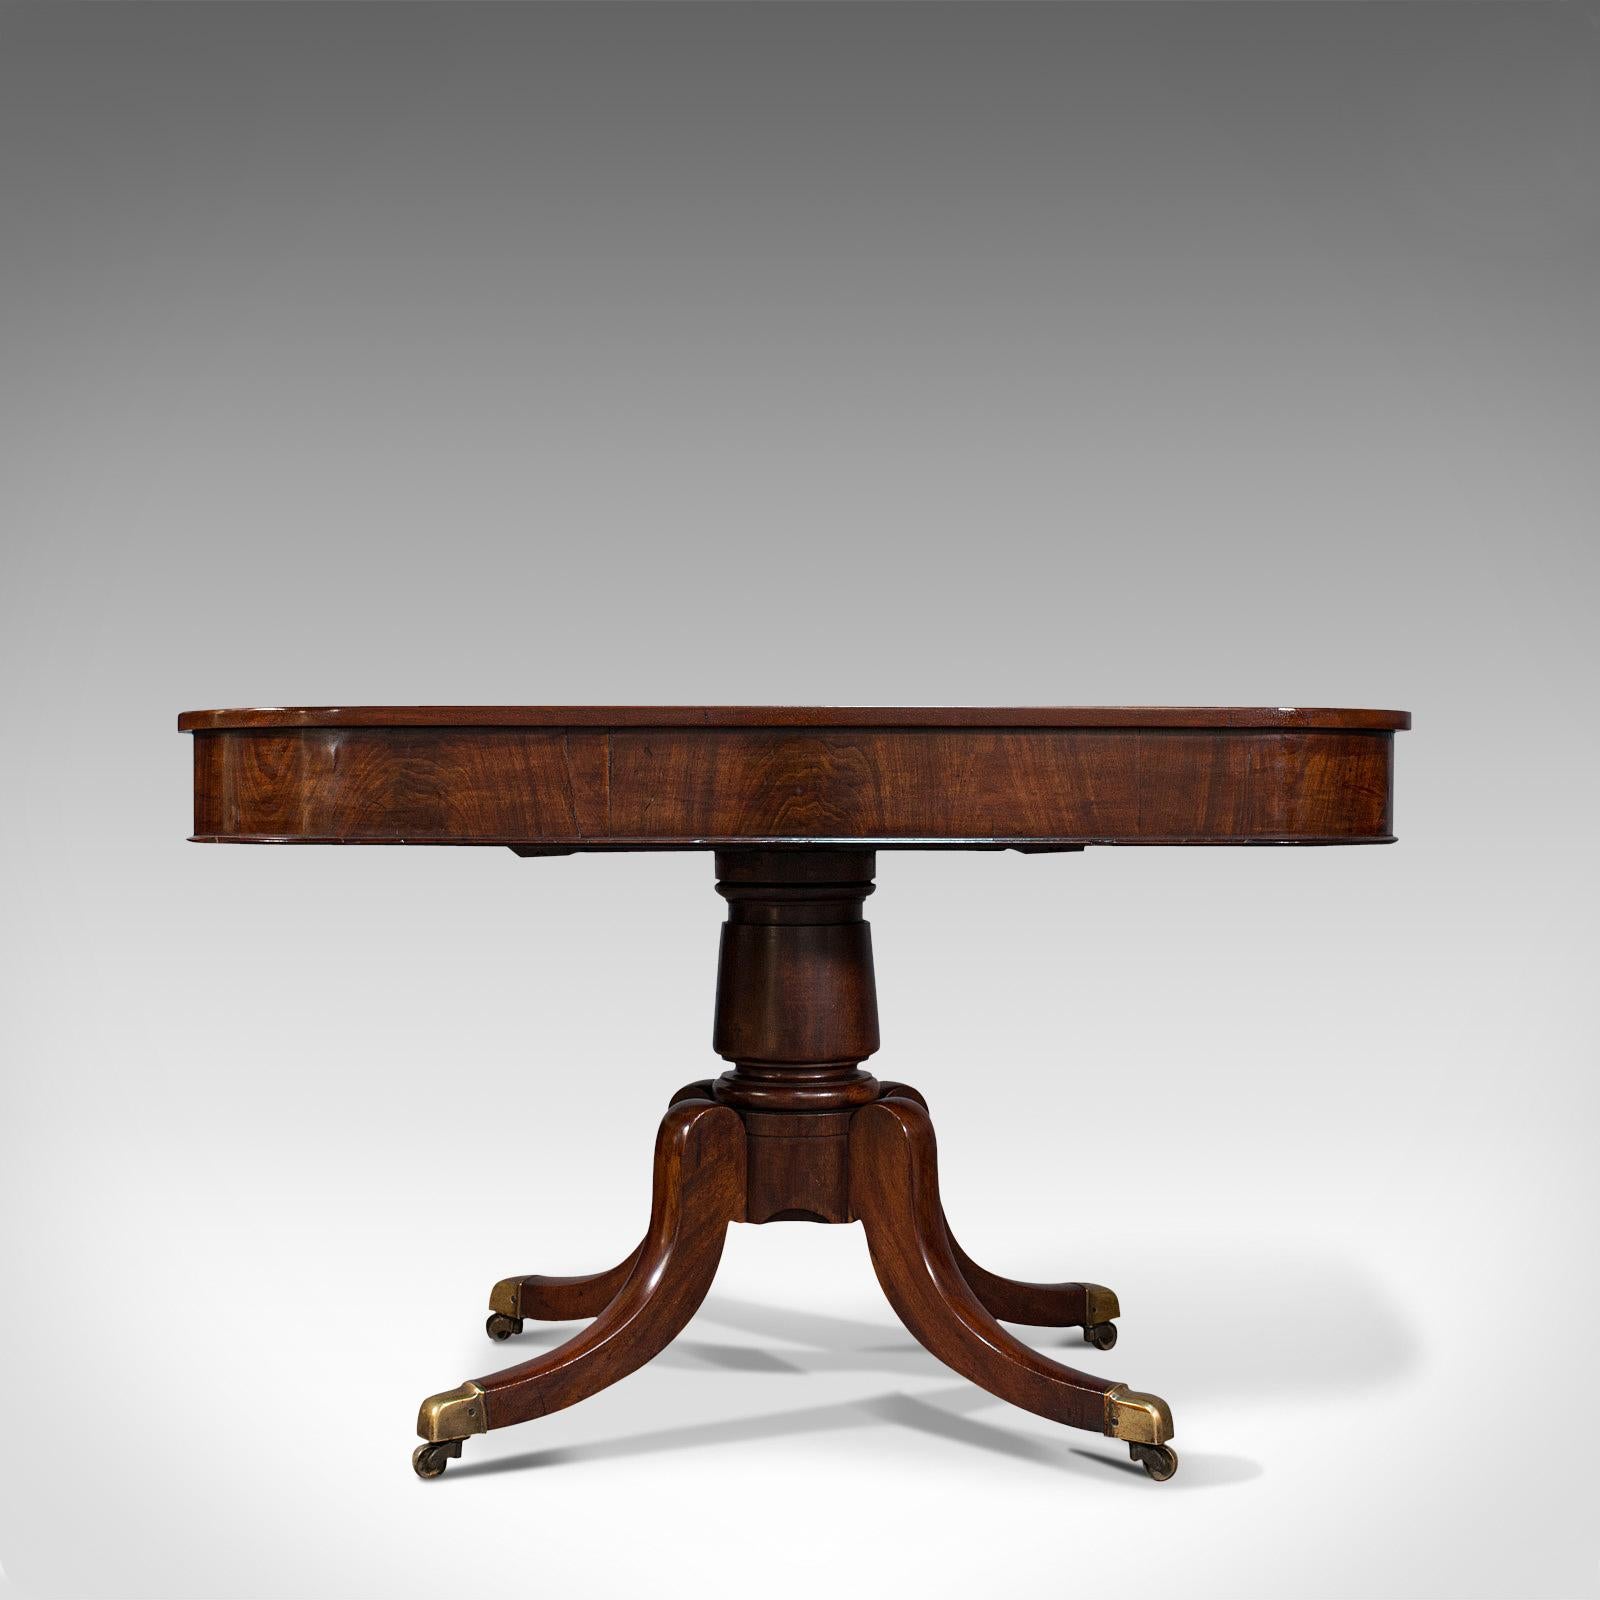 This is a pair of antique hall tables. An English, mahogany side or large lamp table, dating to the Regency period, circa 1830.

Graced with fine colour and attractive craftsmanship
Displaying a desirable aged patina and in good order
Select